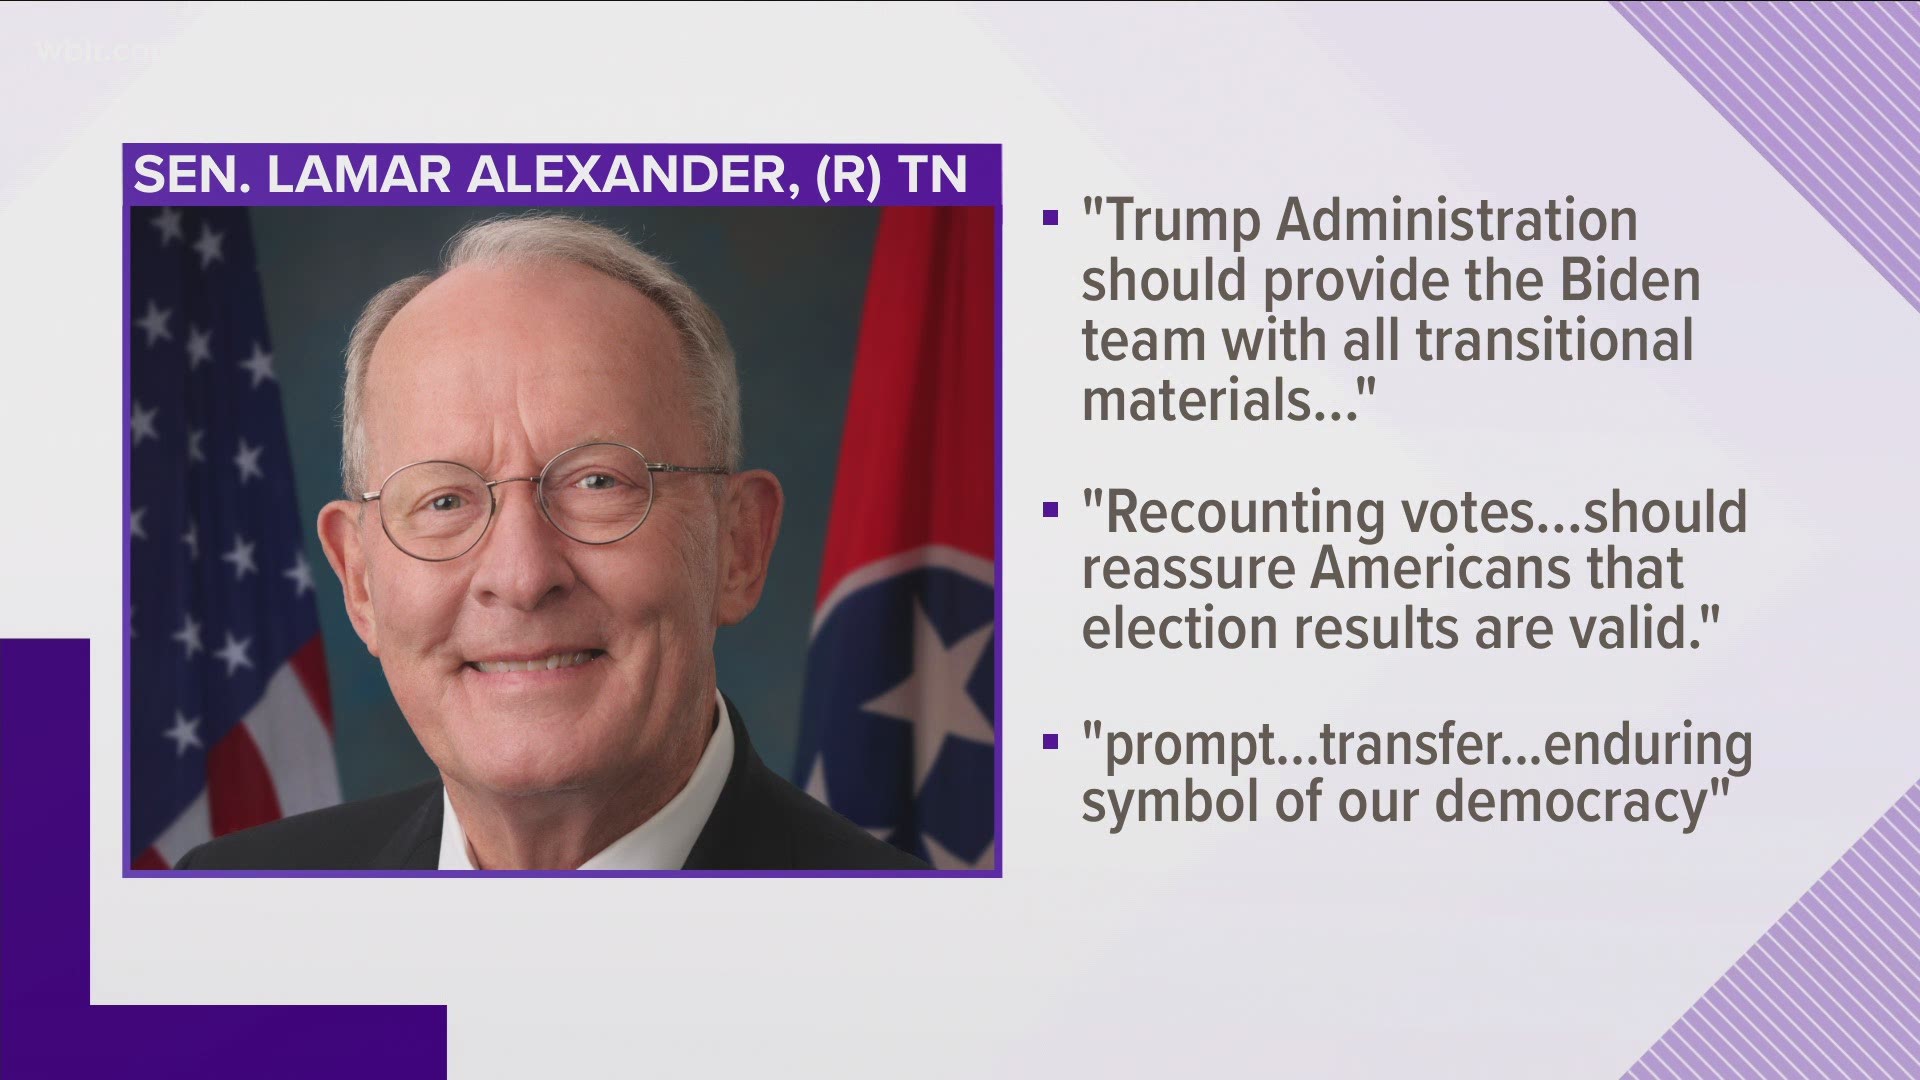 Sen. Lamar Alexander addressed Friday the need for cooperation in the transition to a new president.